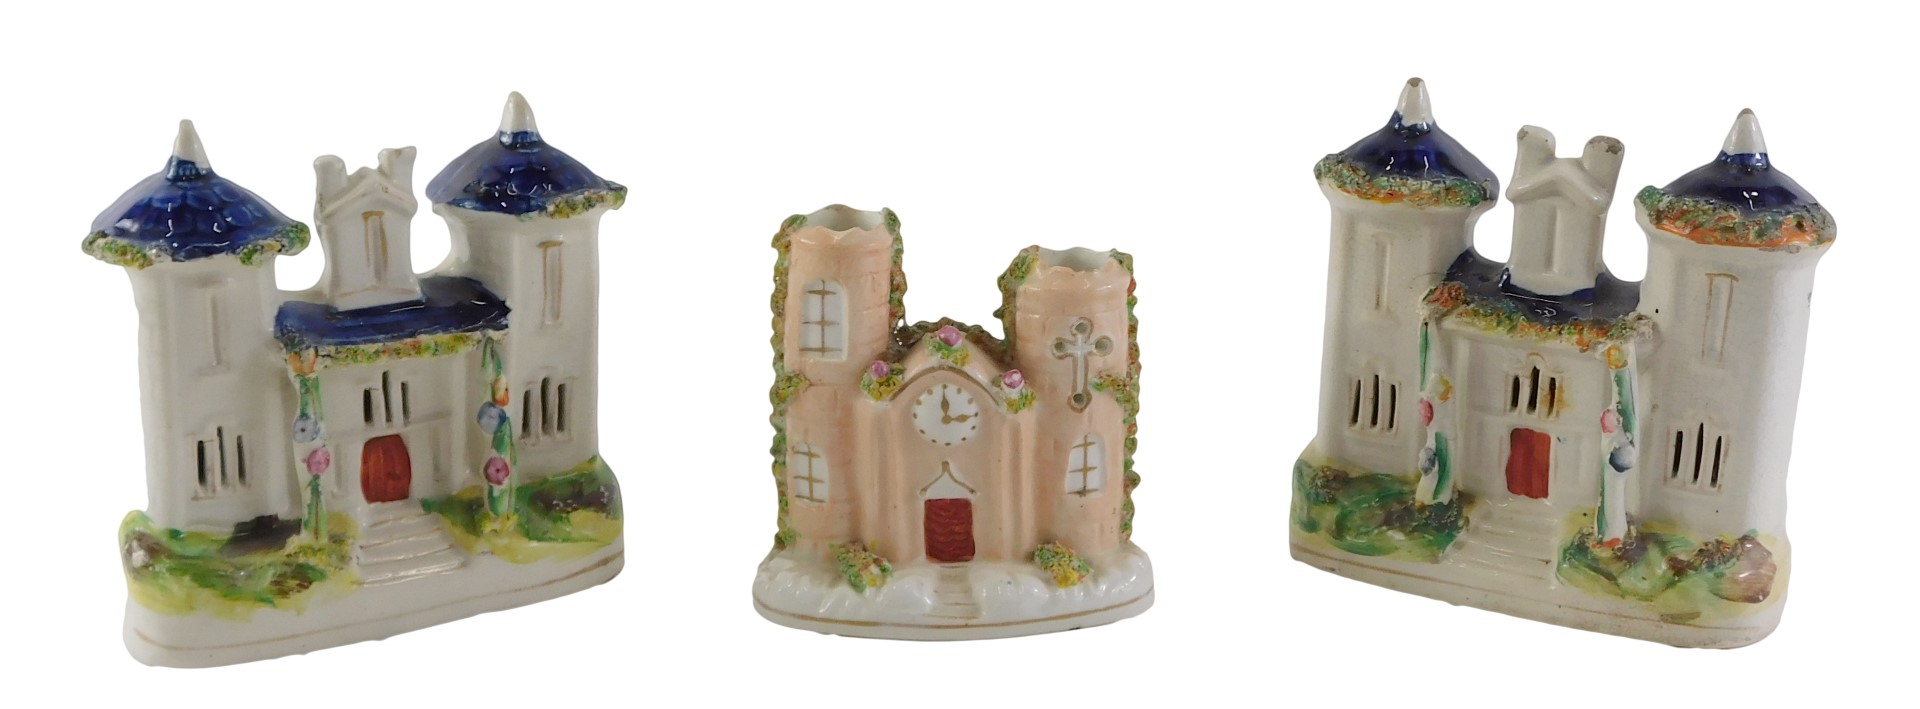 Two similar 19thC Staffordshire cottages, each with blue roofs, 15cm wide, and a further Staffordshi